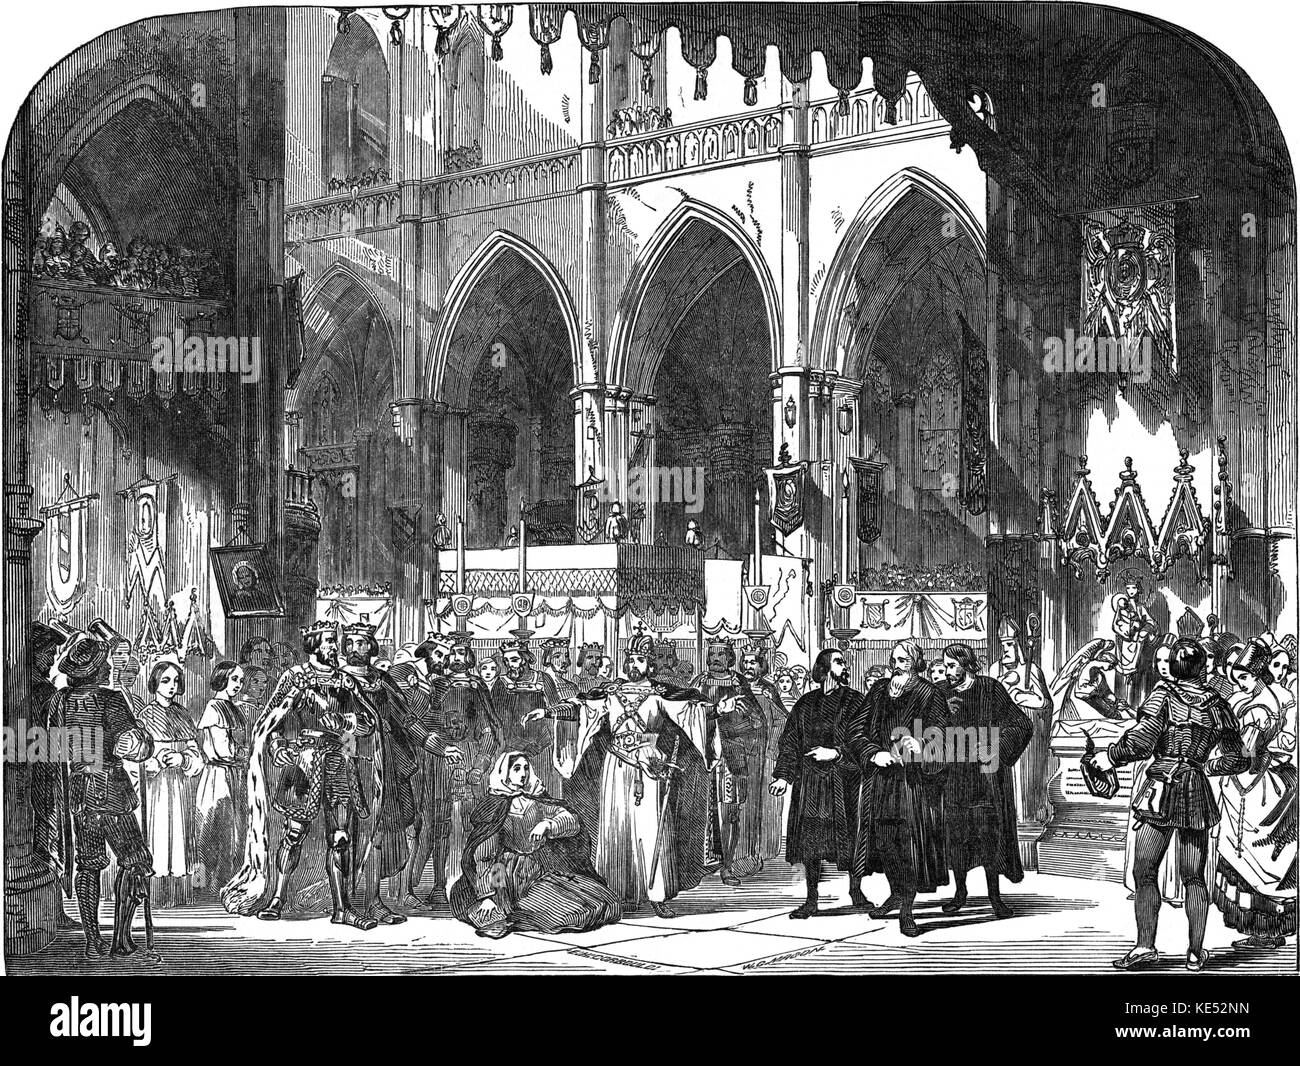 Le prophete by Meyerbeer at Royal Italian Opera, Covent Garden, London 1849 (London premiere). The Coronation  scene. Performers:   Viardot, Hayes, Mario, Tagliafico, conductor Costa. Source: Illustrated London News28 July, 1849. German composer, 5 September 1791 - 2 May 1864. Stock Photo